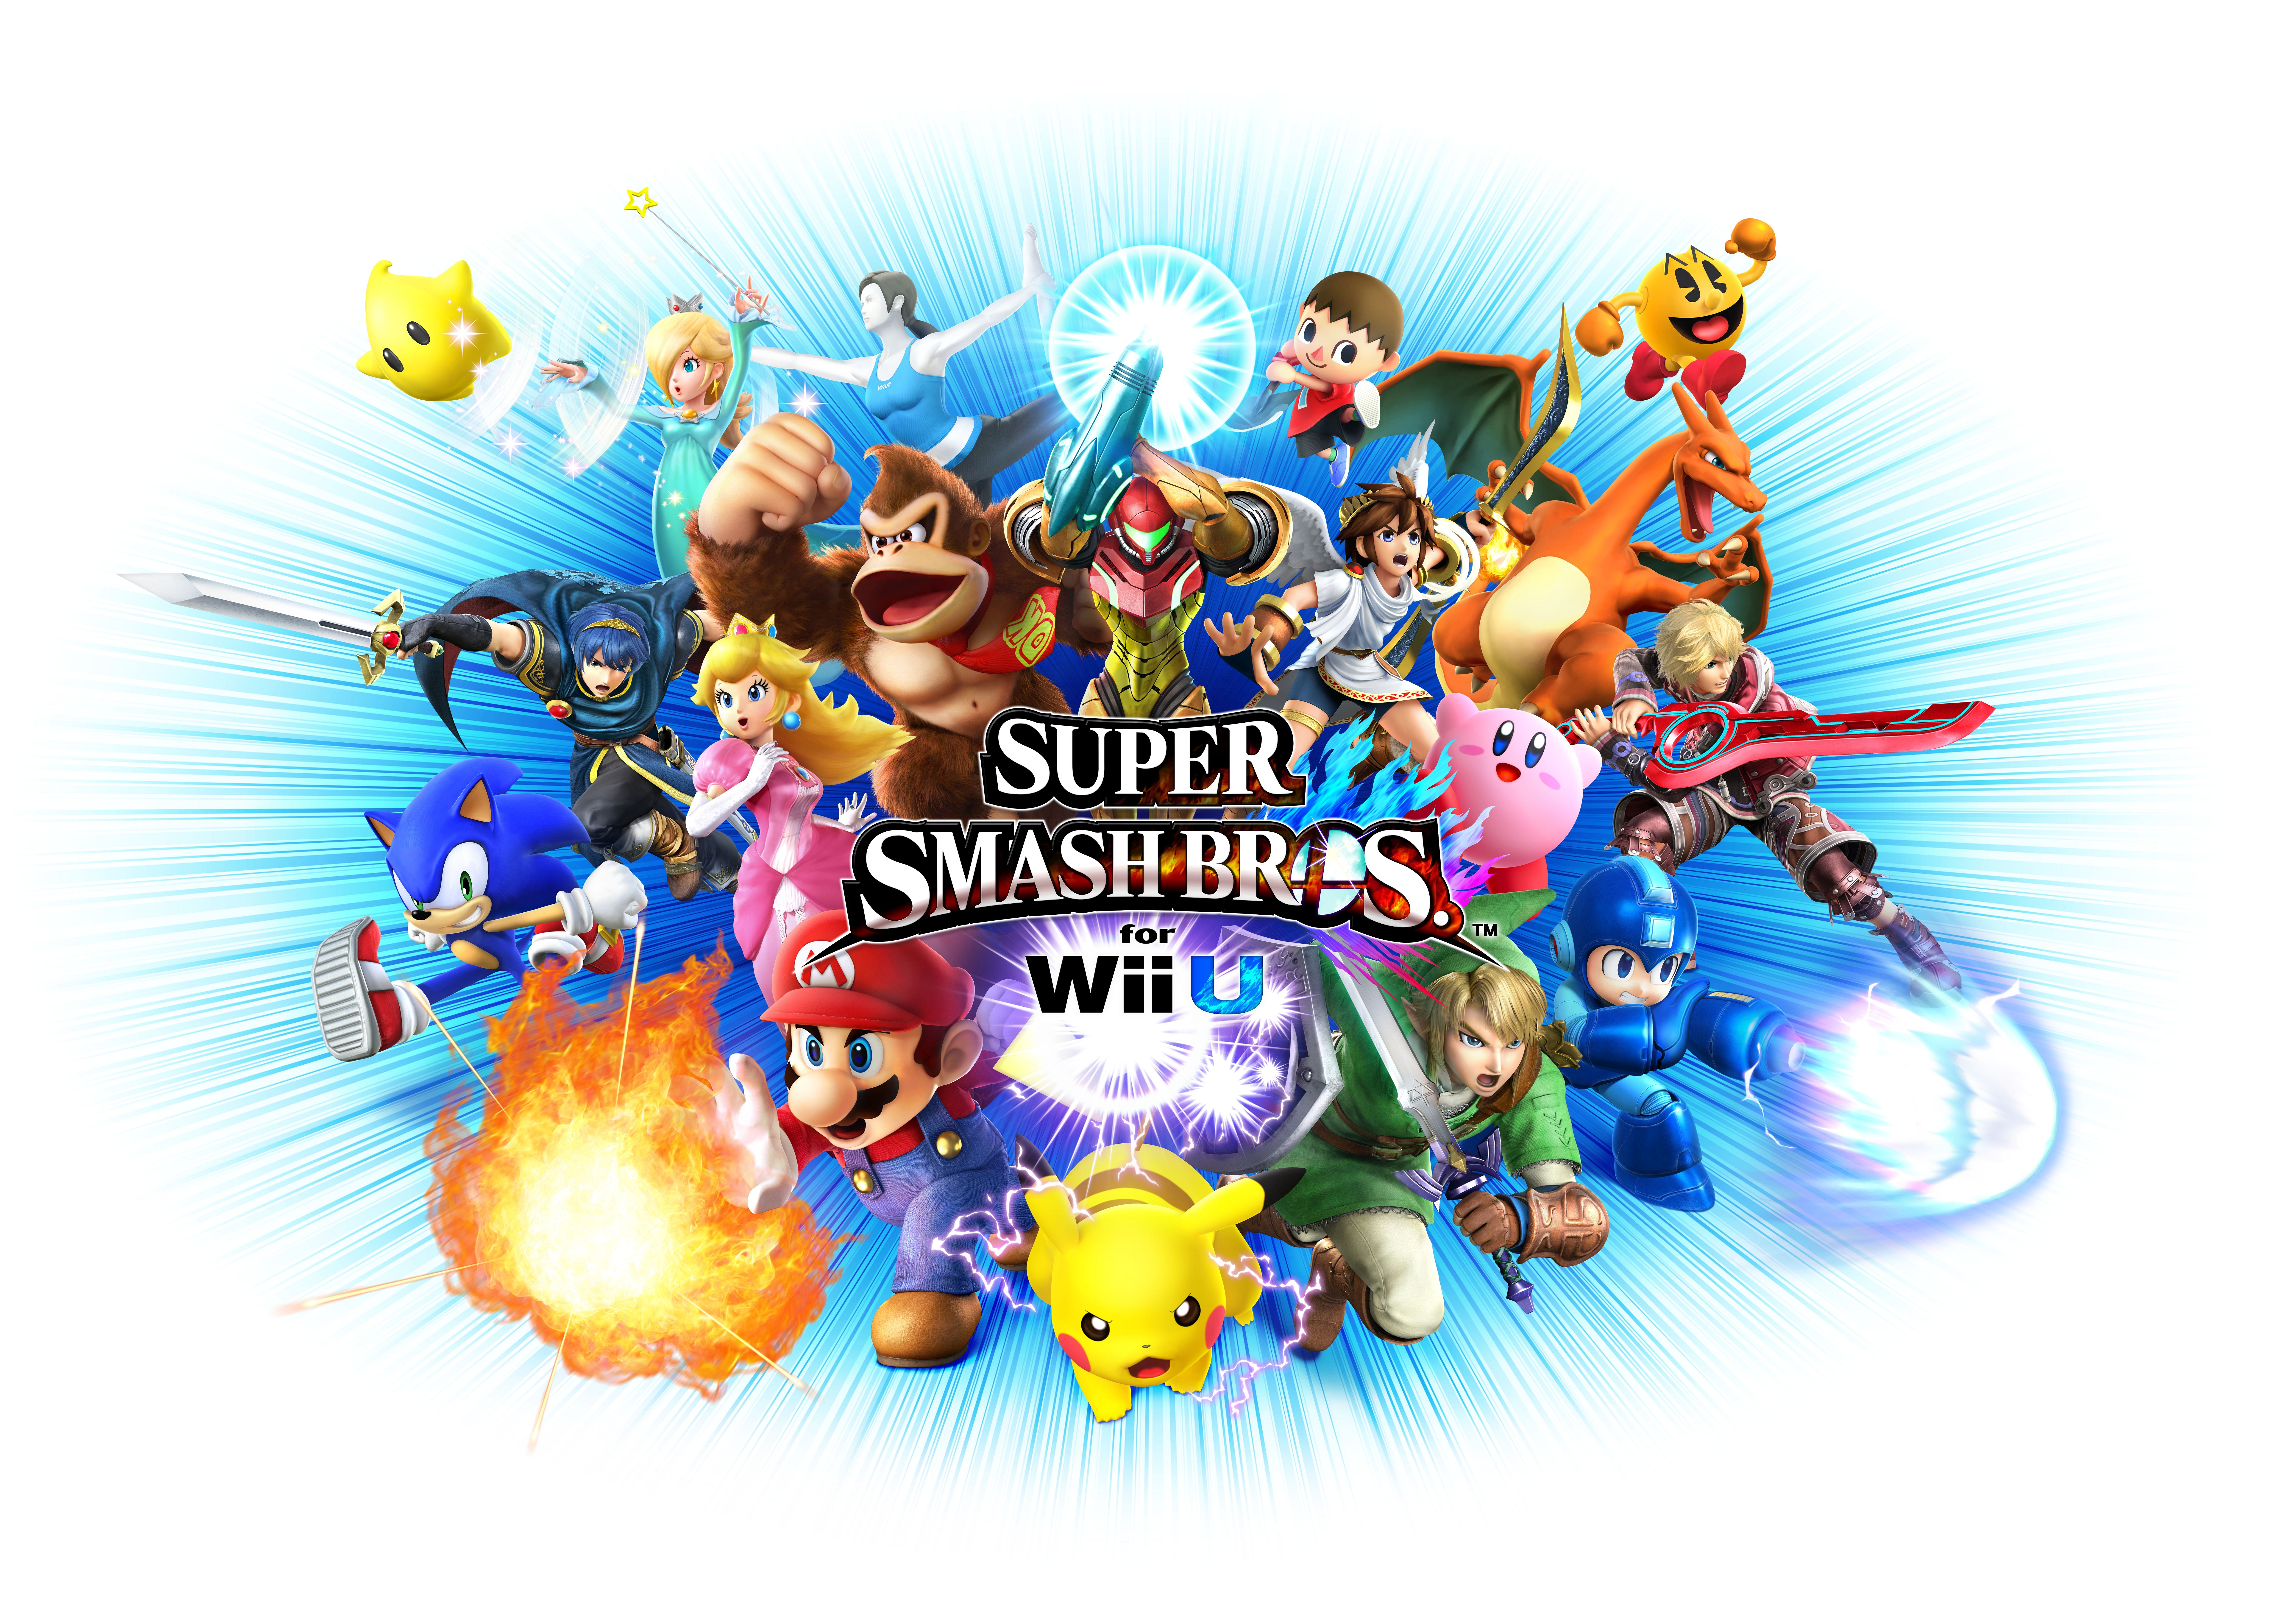 Video Game Super Smash Bros. for Nintendo 3DS and Wii U HD Wallpaper | Background Image